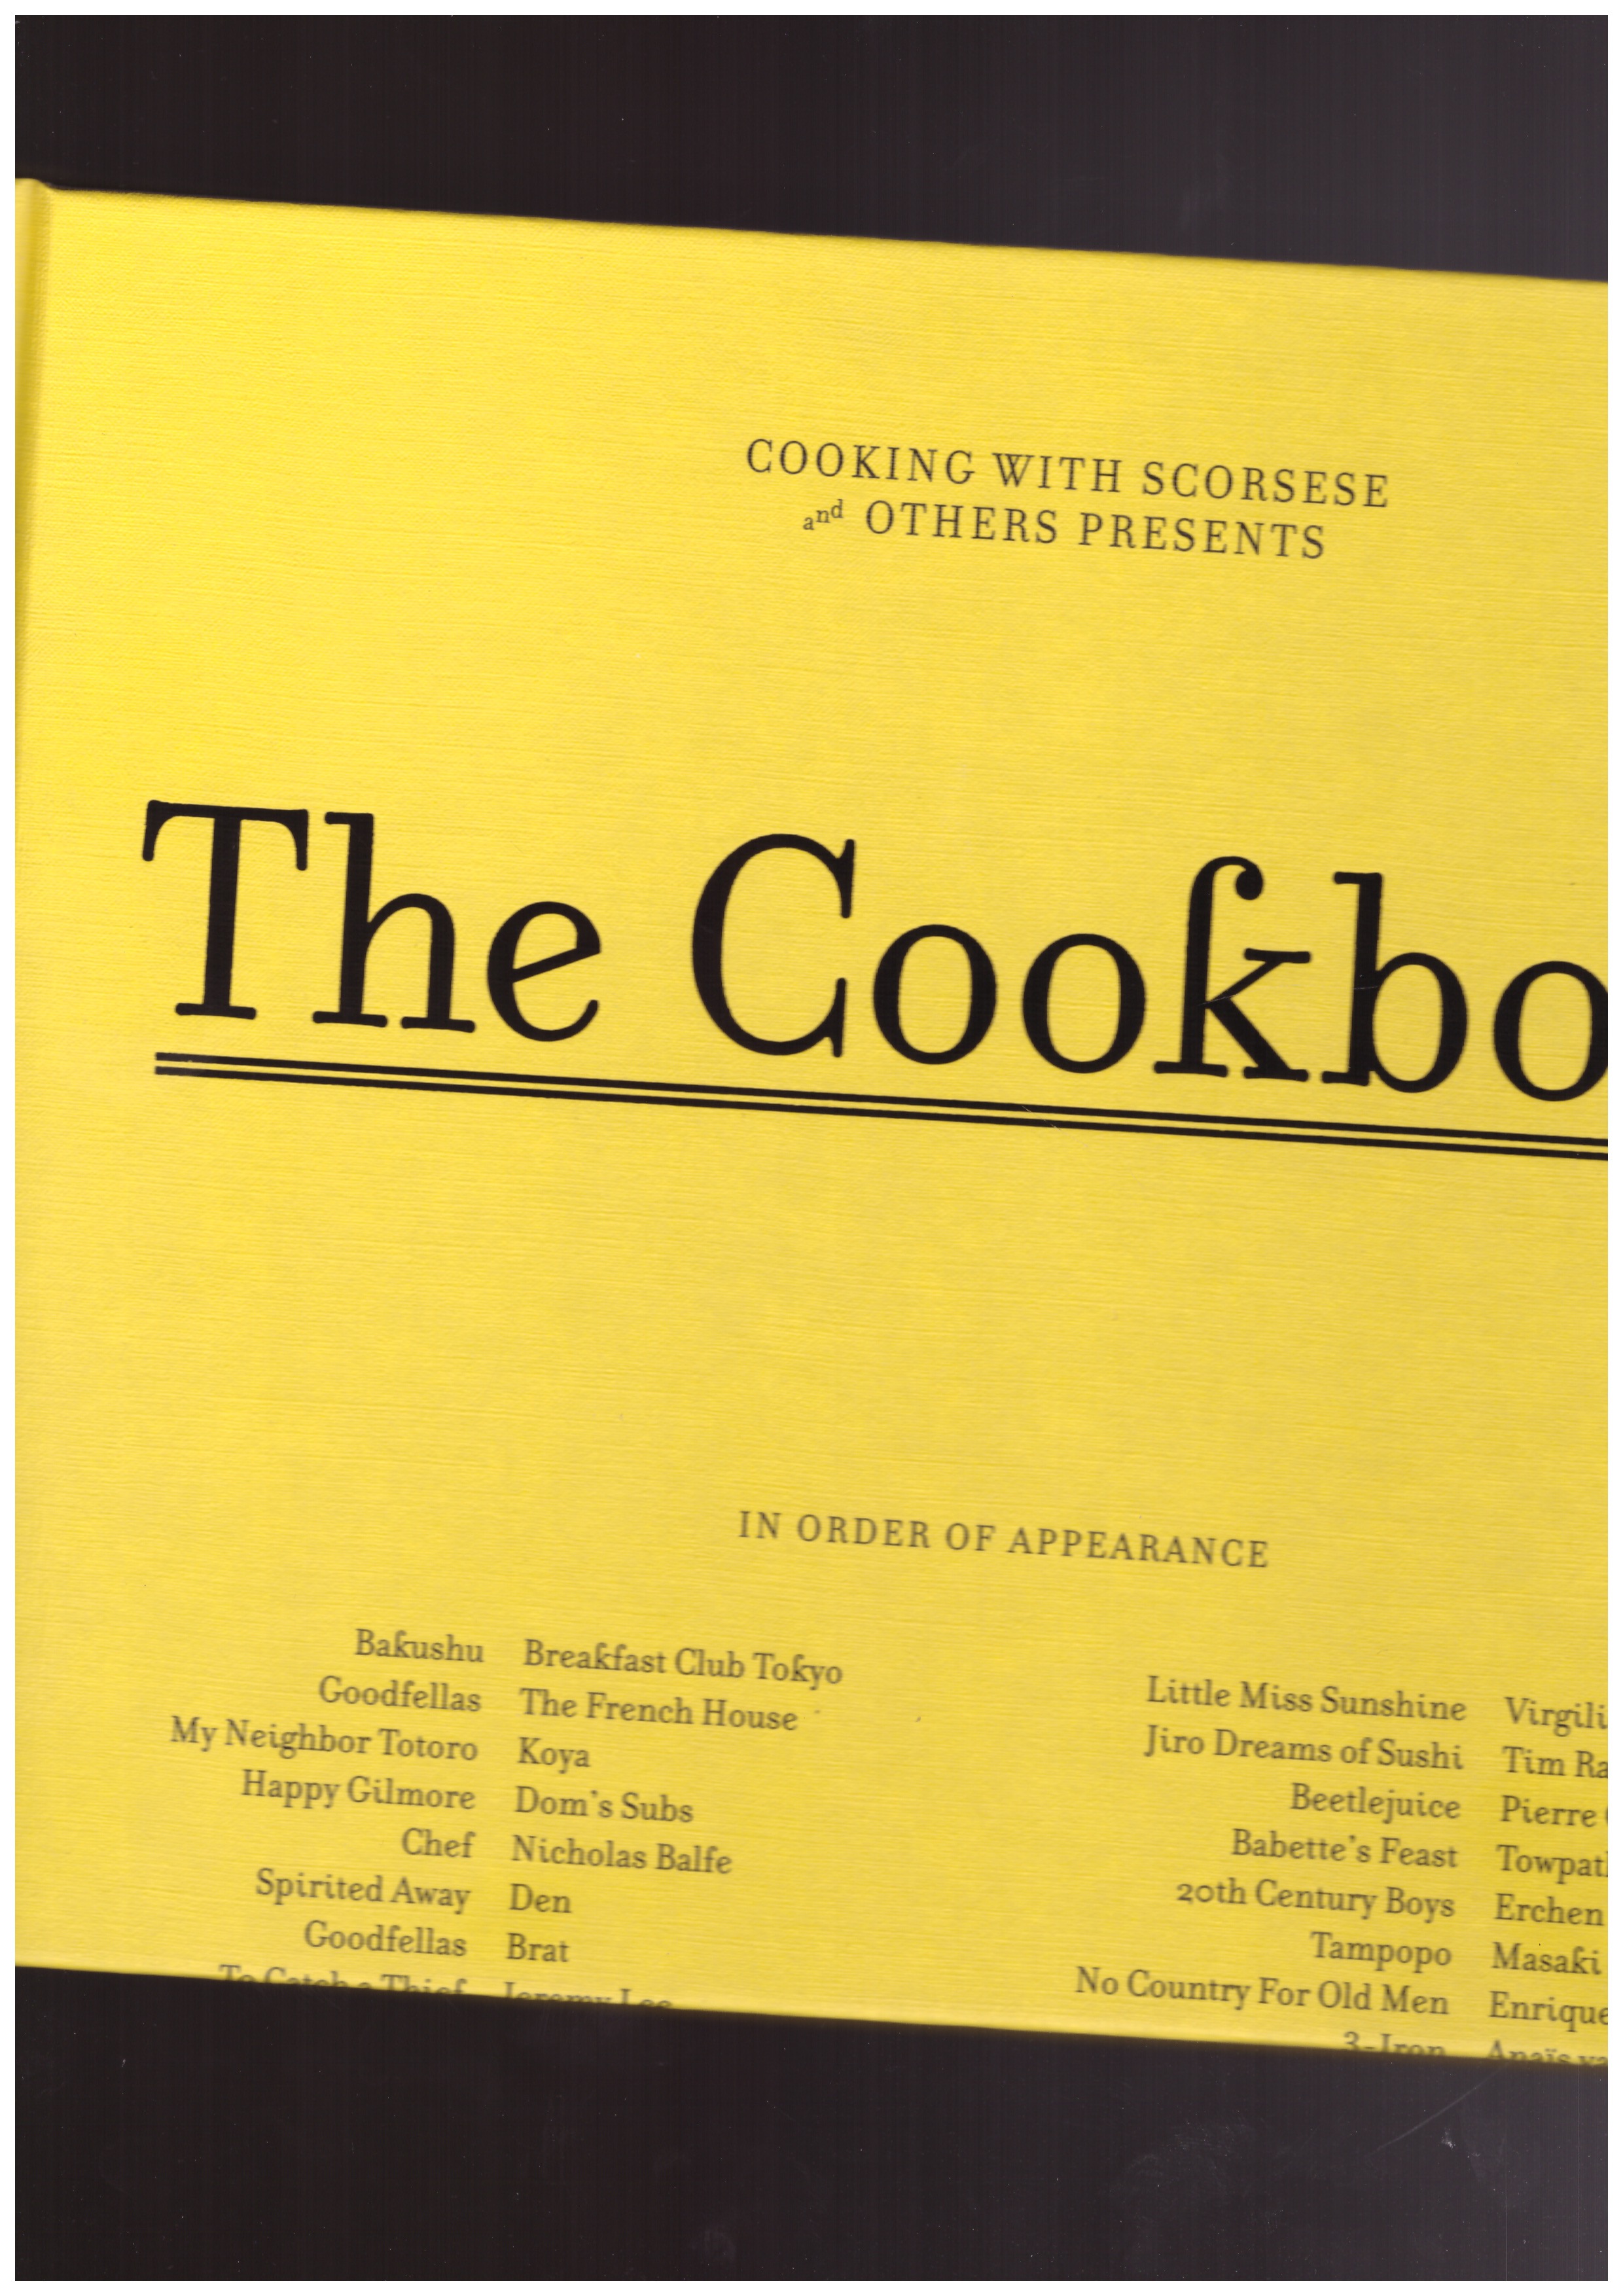 HATO (ed.) - Cooking with Scorsese: The Cookbook